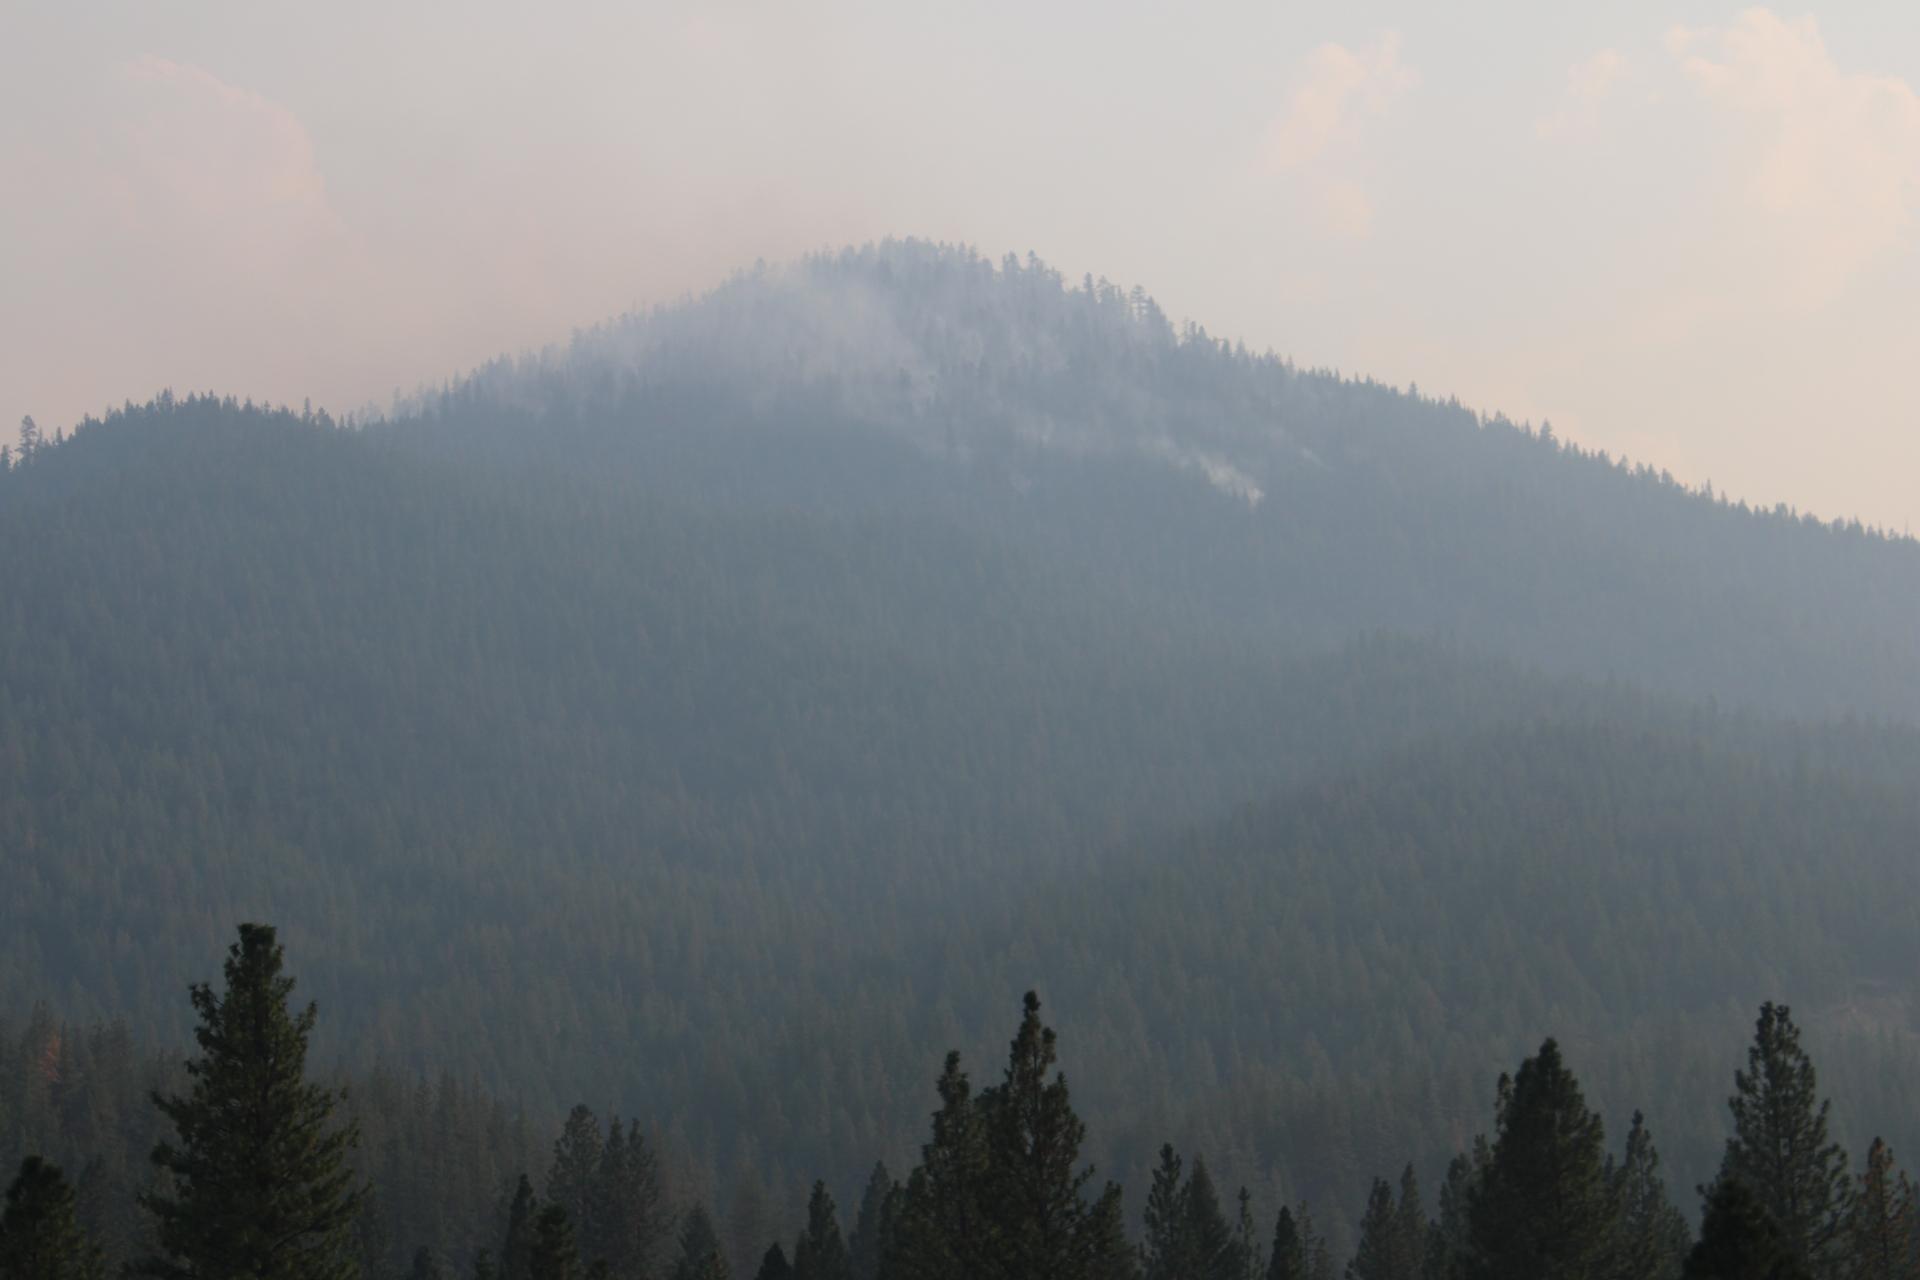 Smoke in and above a heavily forested mountain.